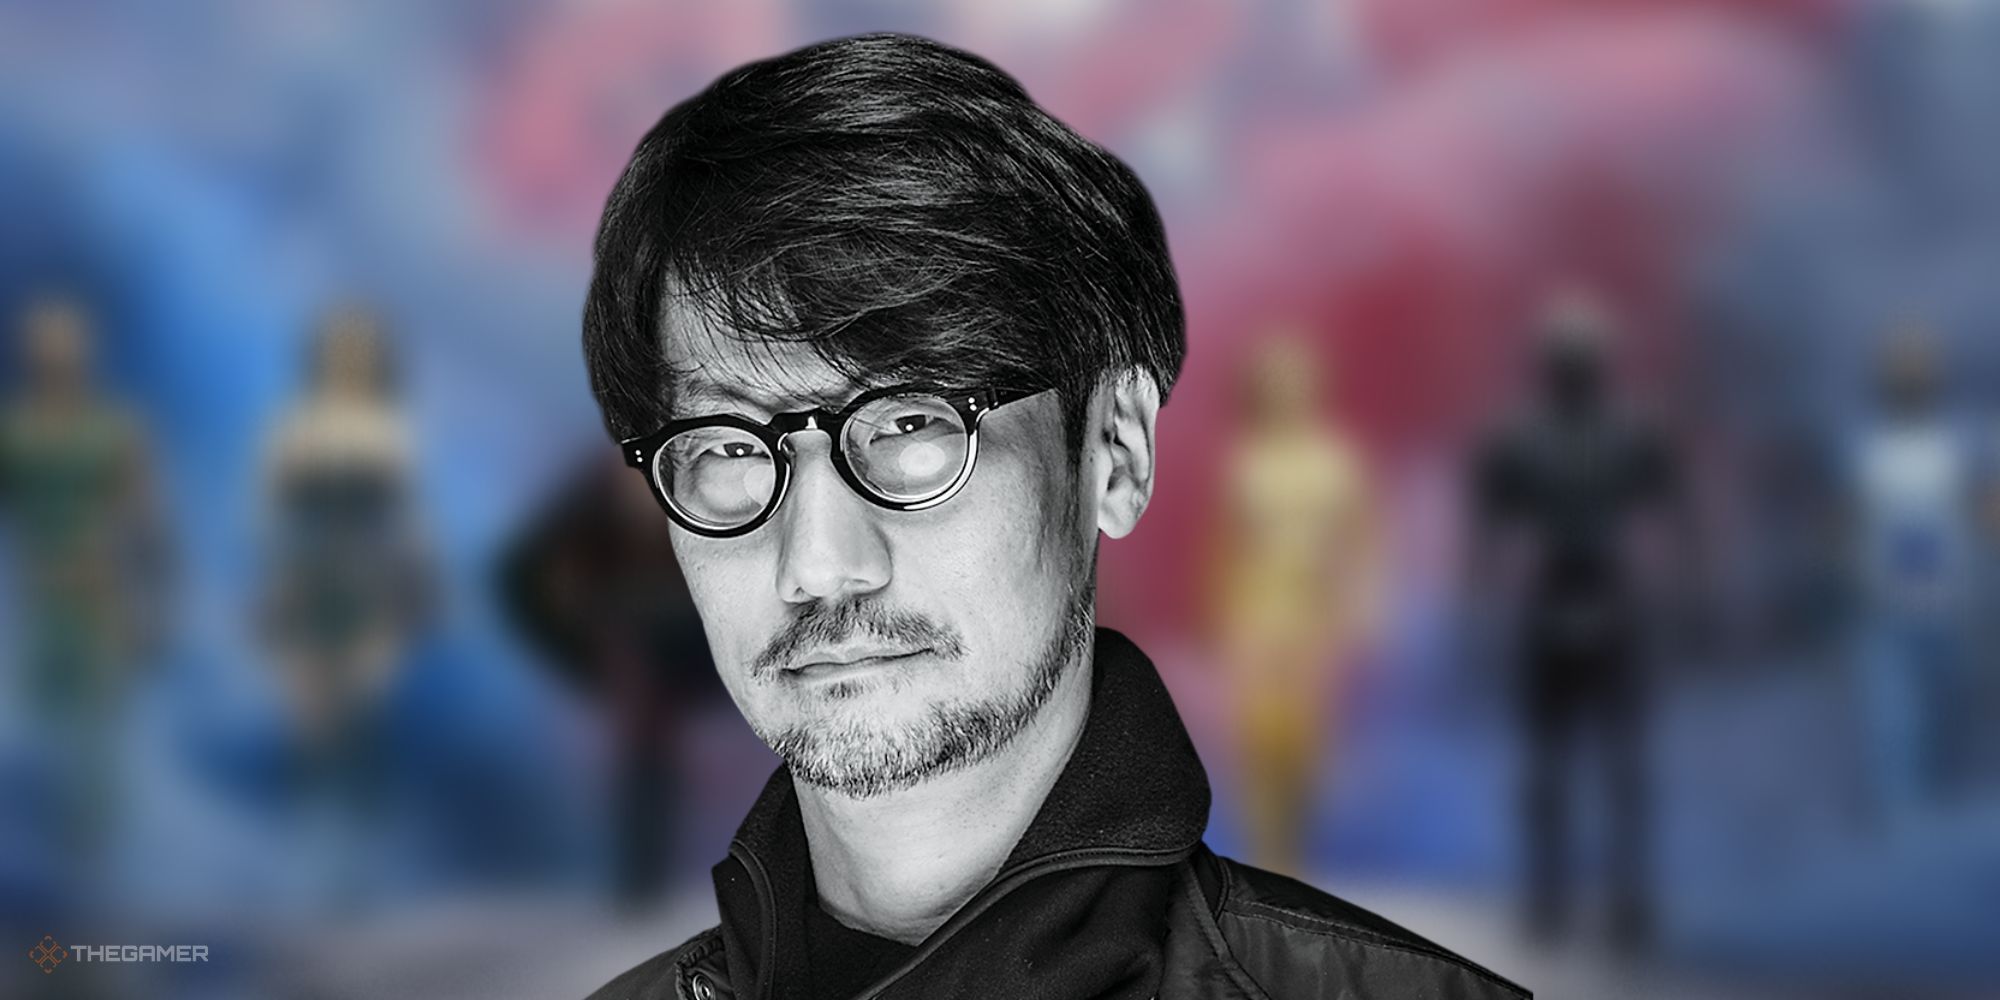 A portrait of game director Hideo Kojima in front of a blurred image of Amazon's show, The Boys